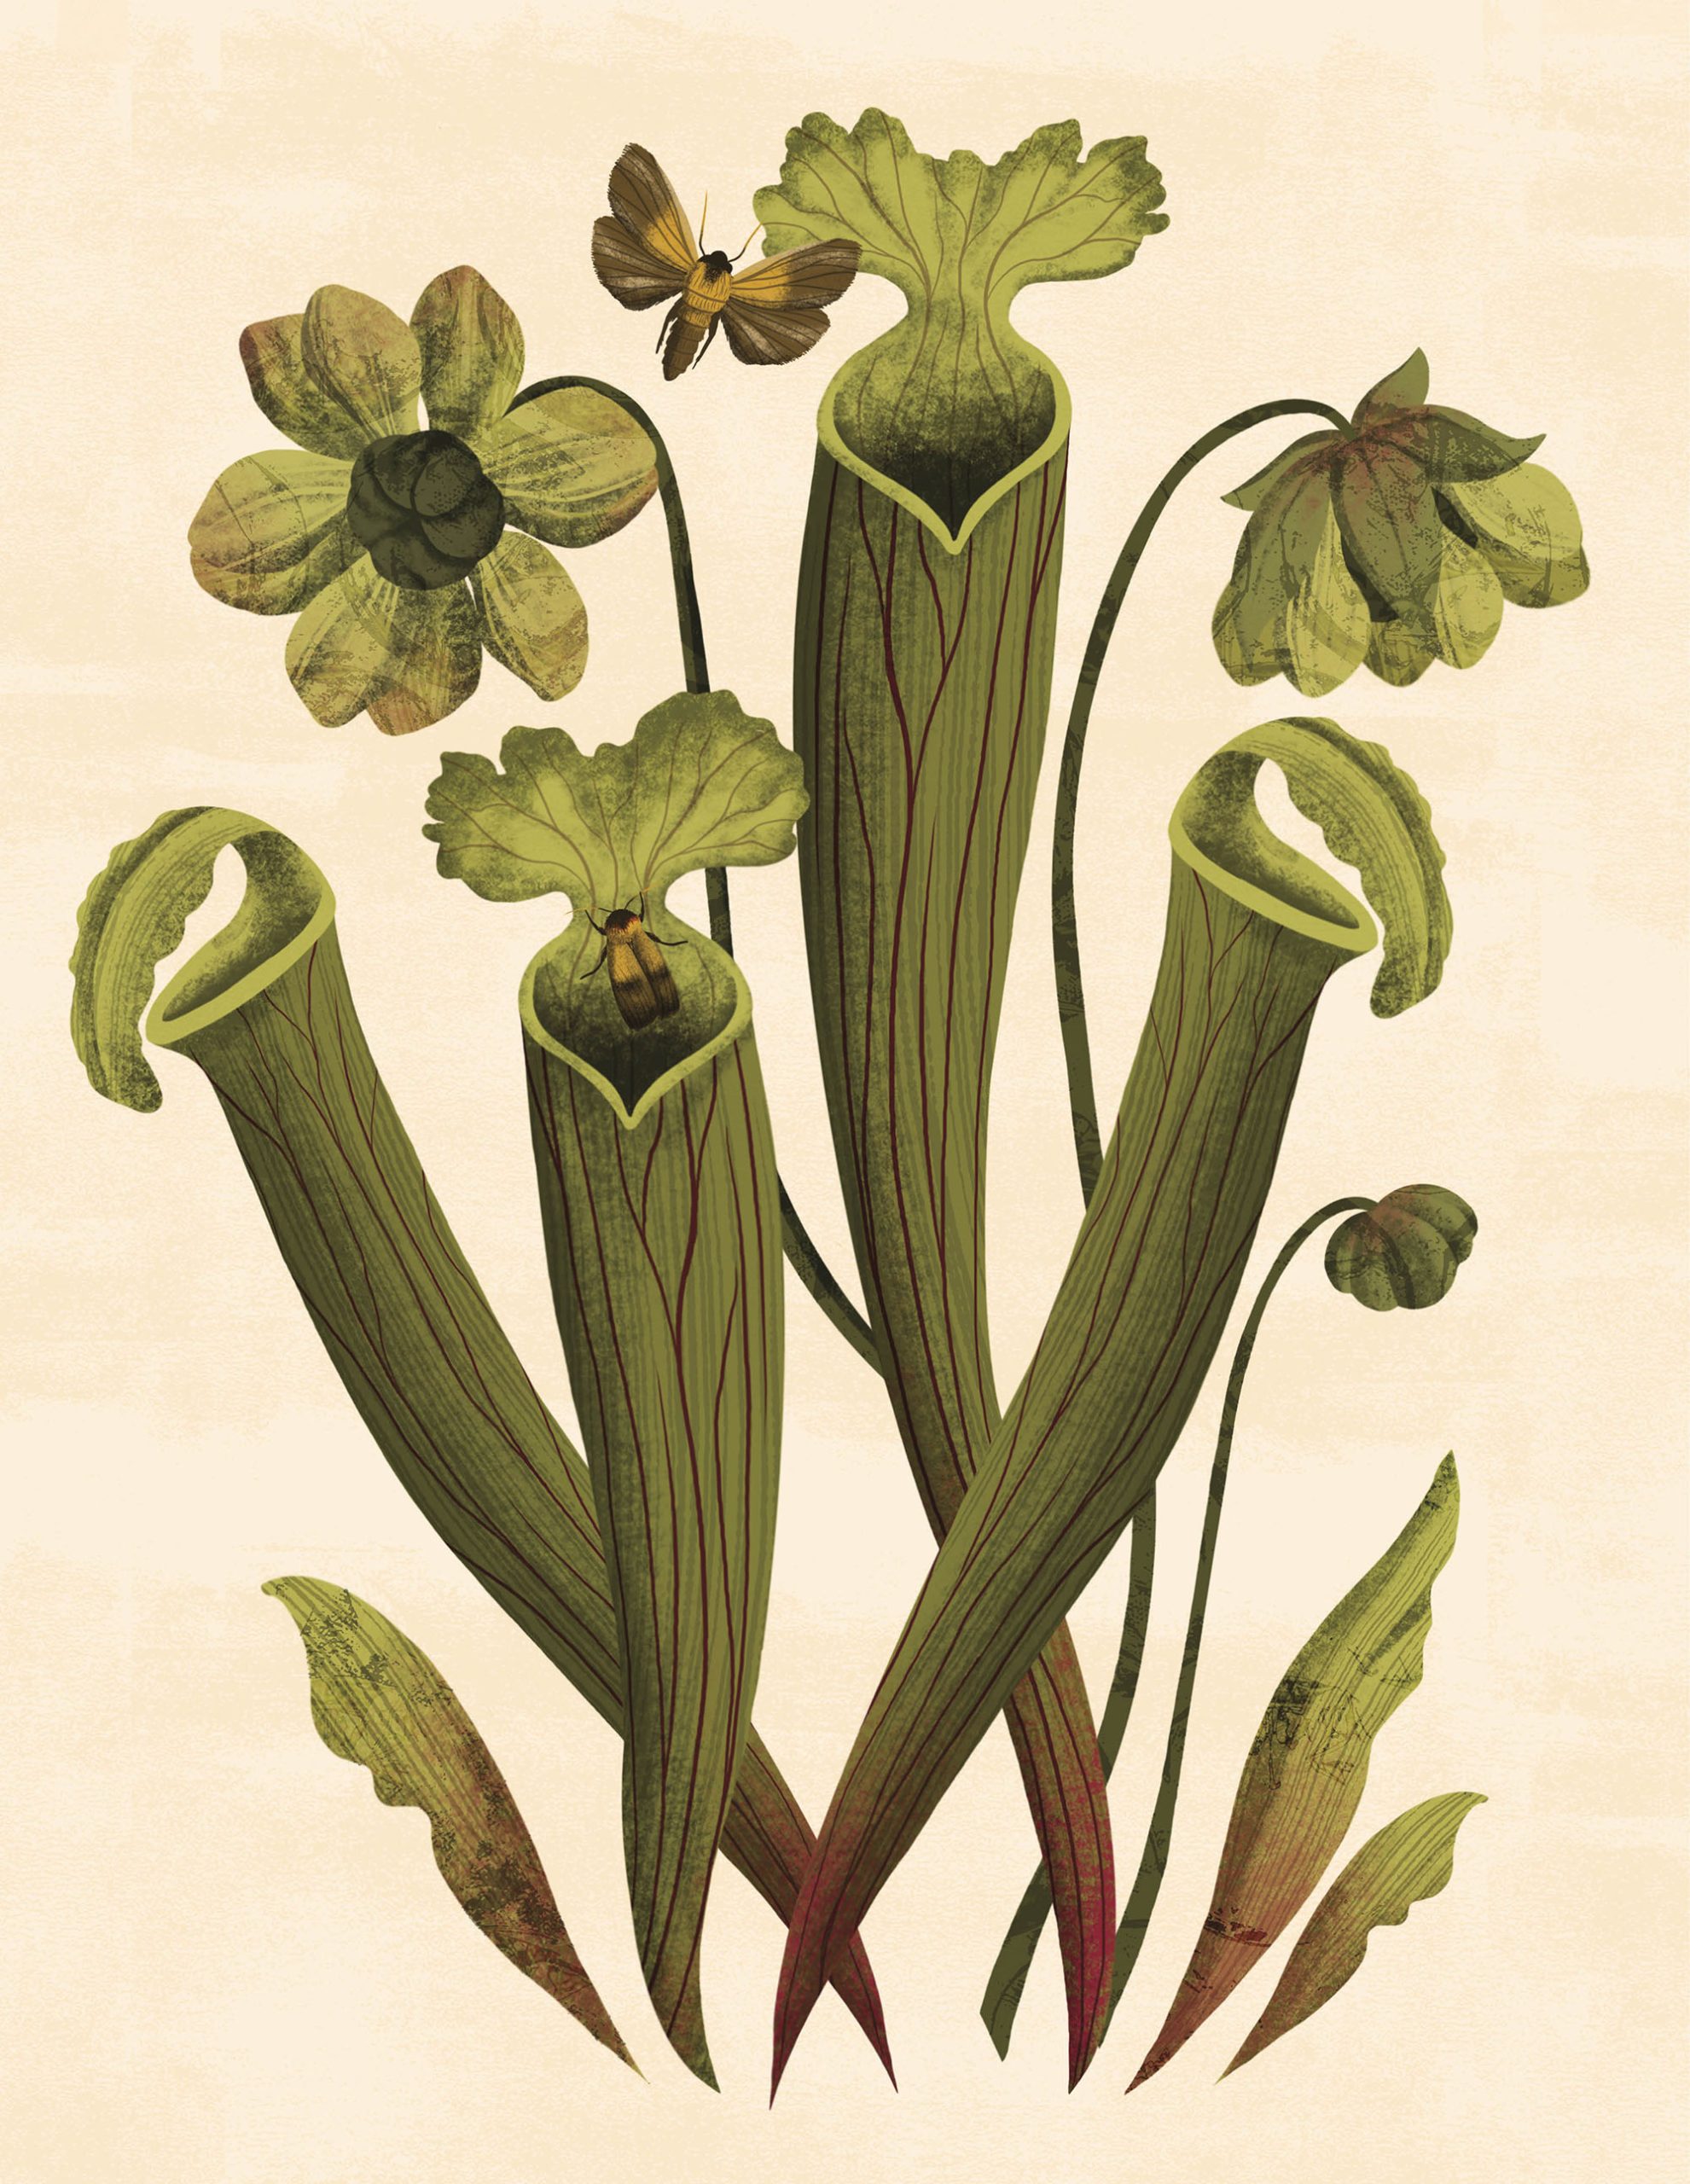 An illustration of large green tubular flowers on a tan background